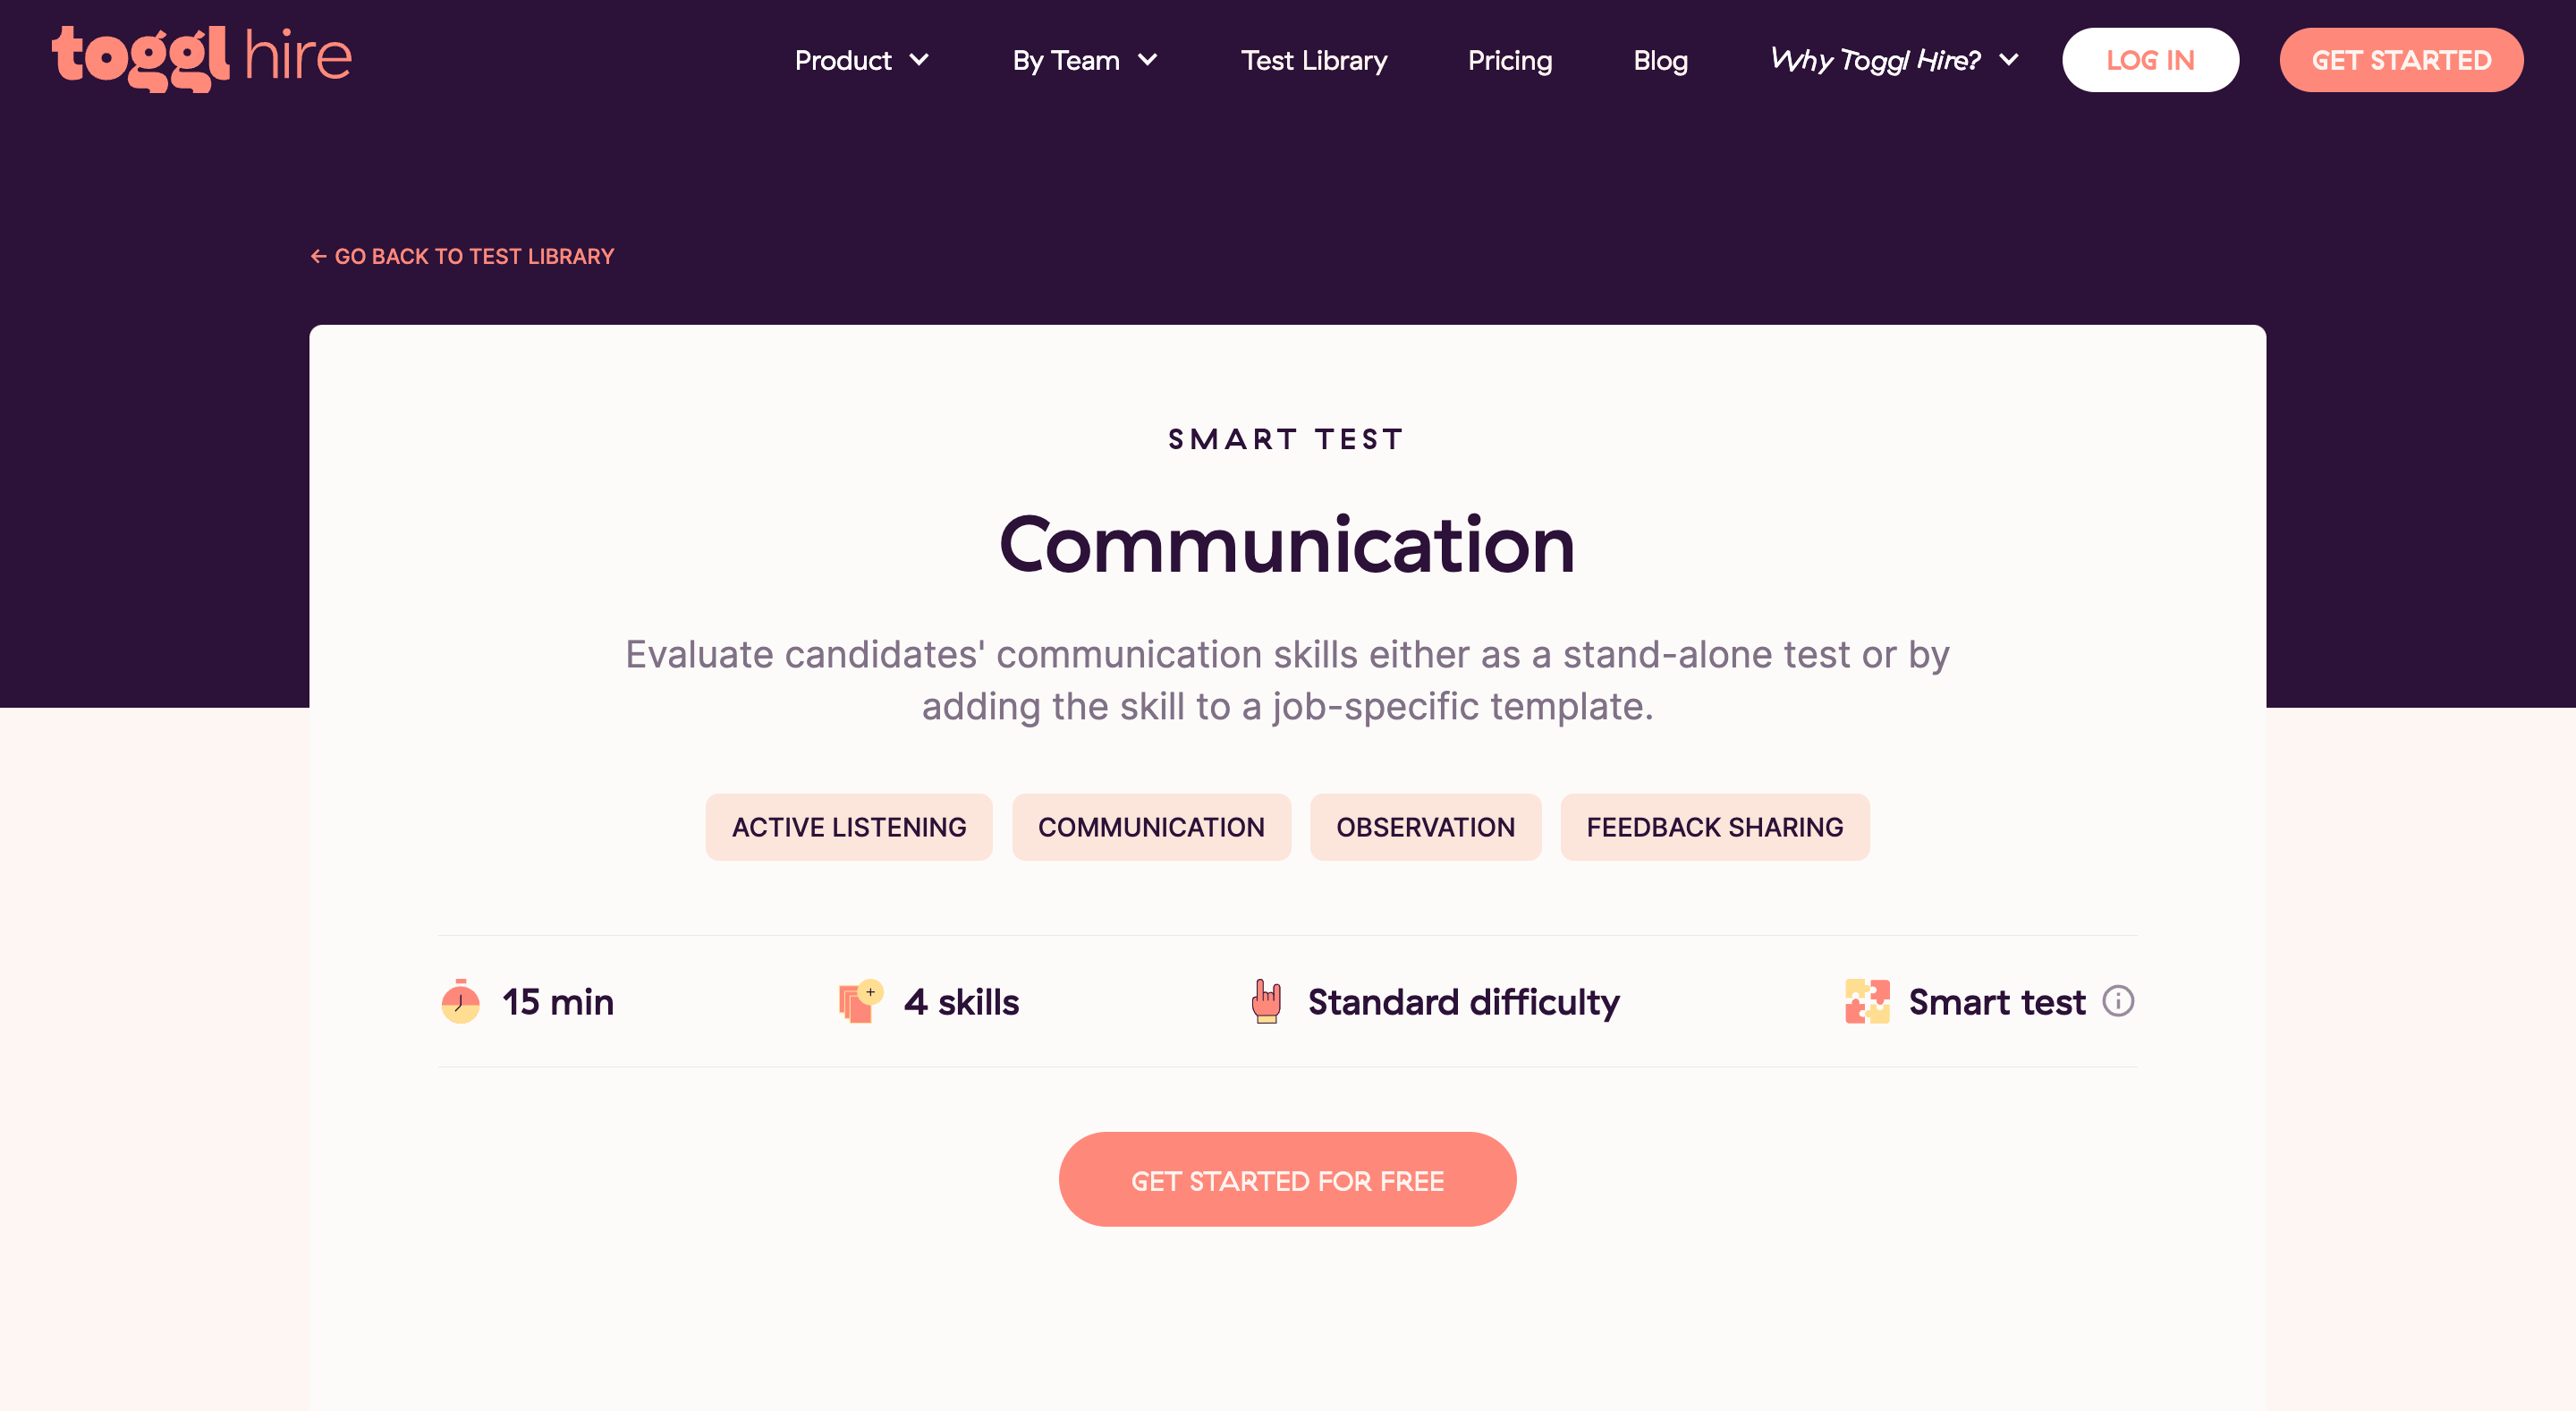 Communication skills are some of the most important for e-commerce managers. Anything from writing product descriptions to crafting promotional offers or reporting on sales metrics requires a good grasp of communication abilities.  